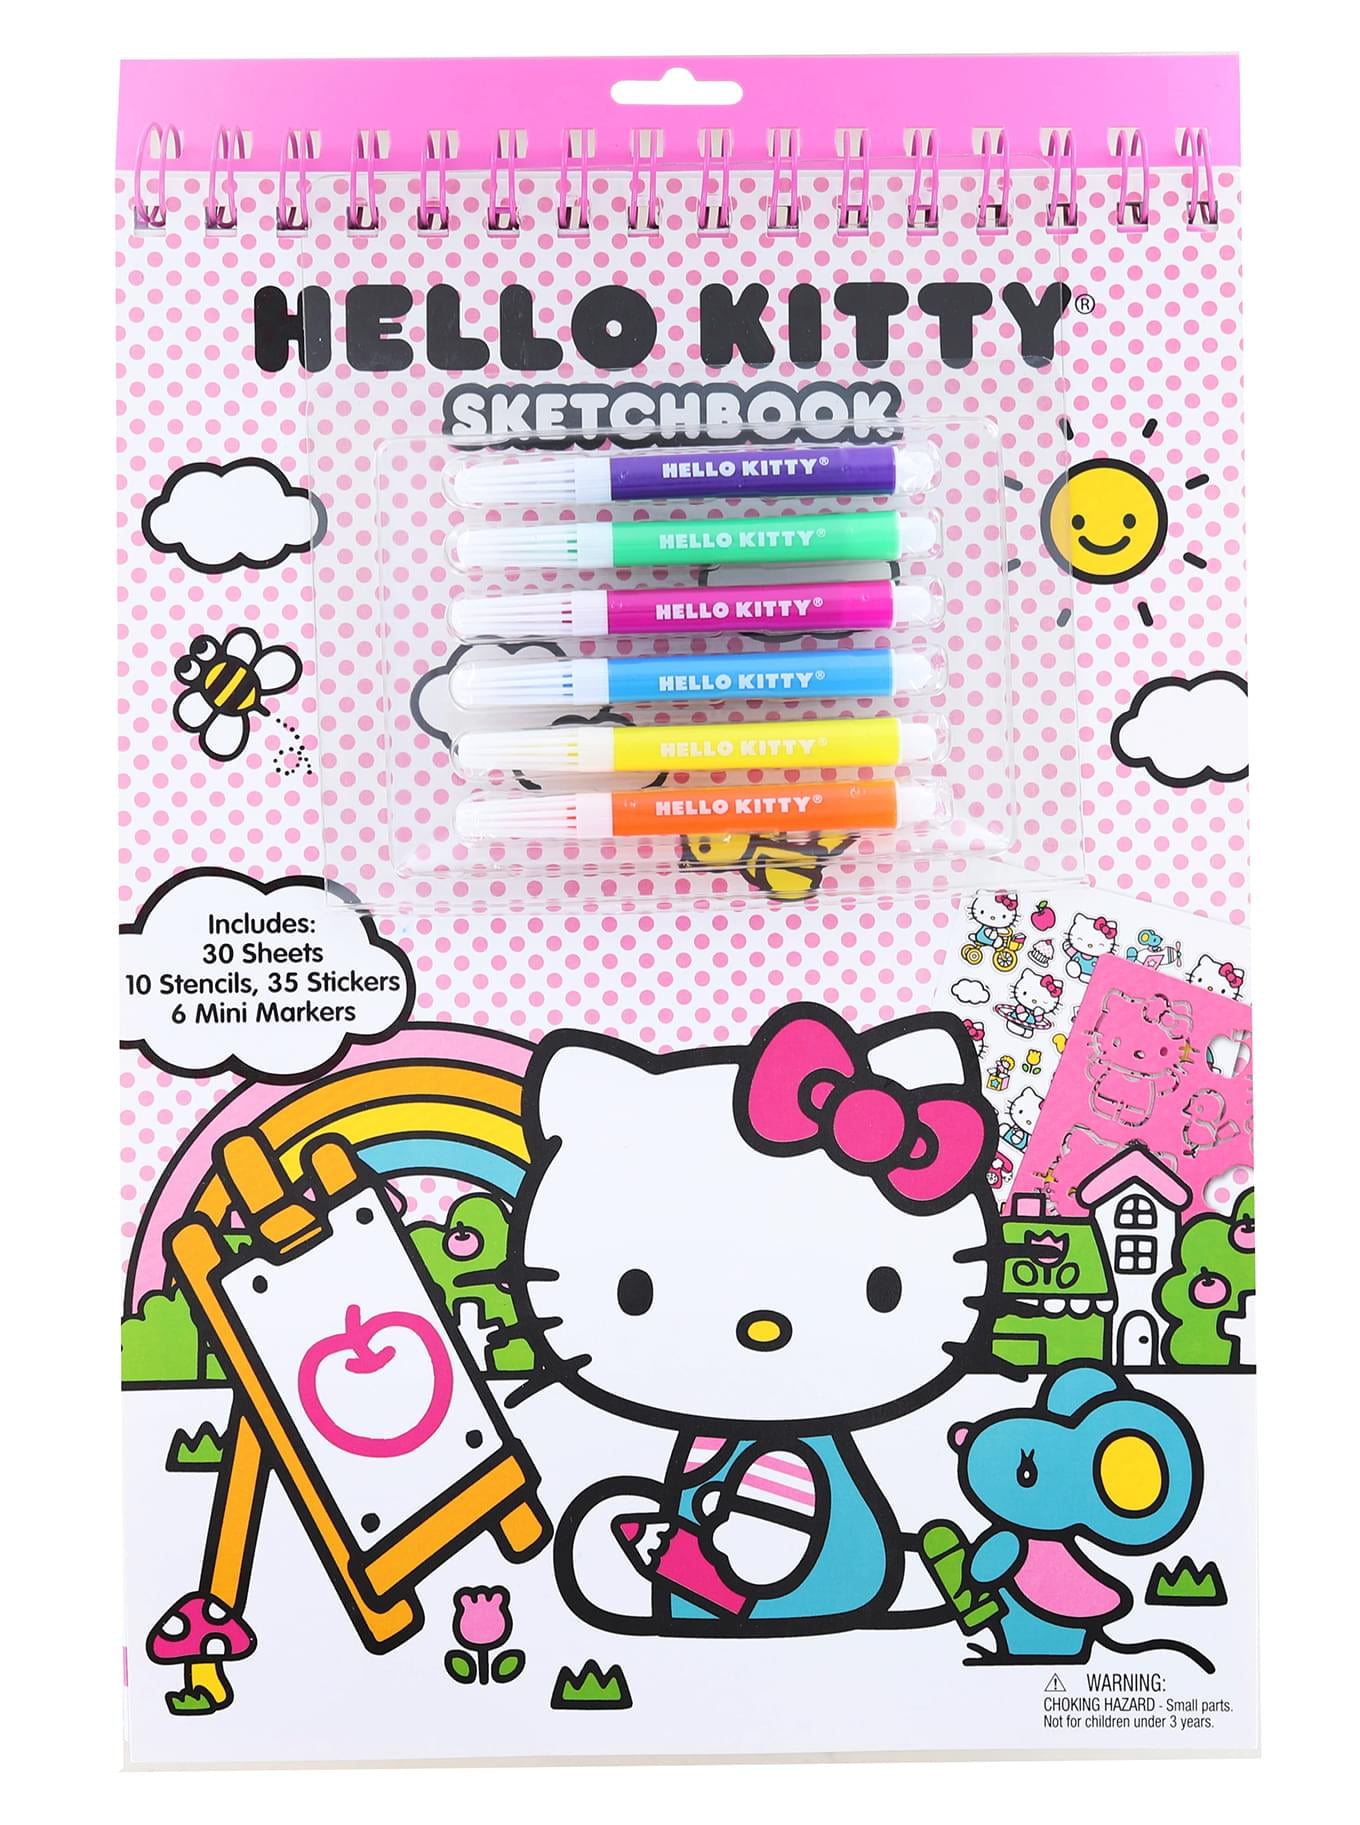 Hello Kitty Sketchbook – The Dirt Road (TDR)